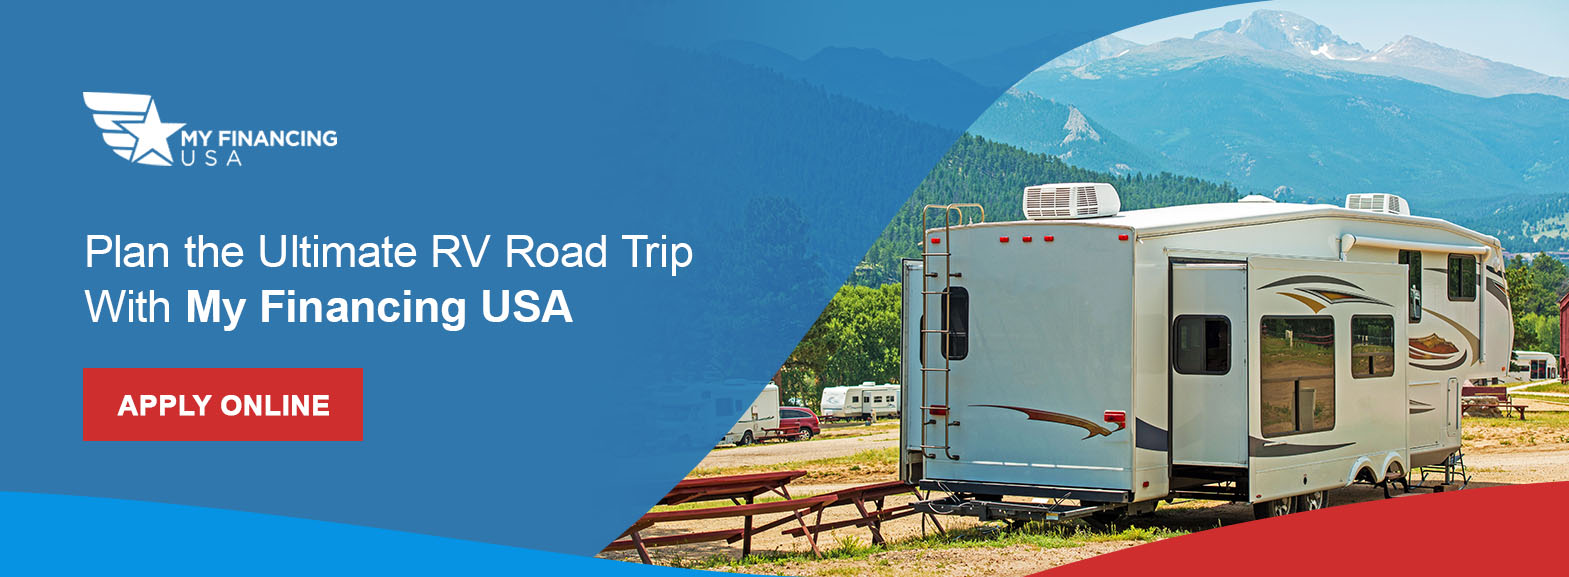 Plan the Ultimate RV Road Trip With My Financing USA. Apply online!